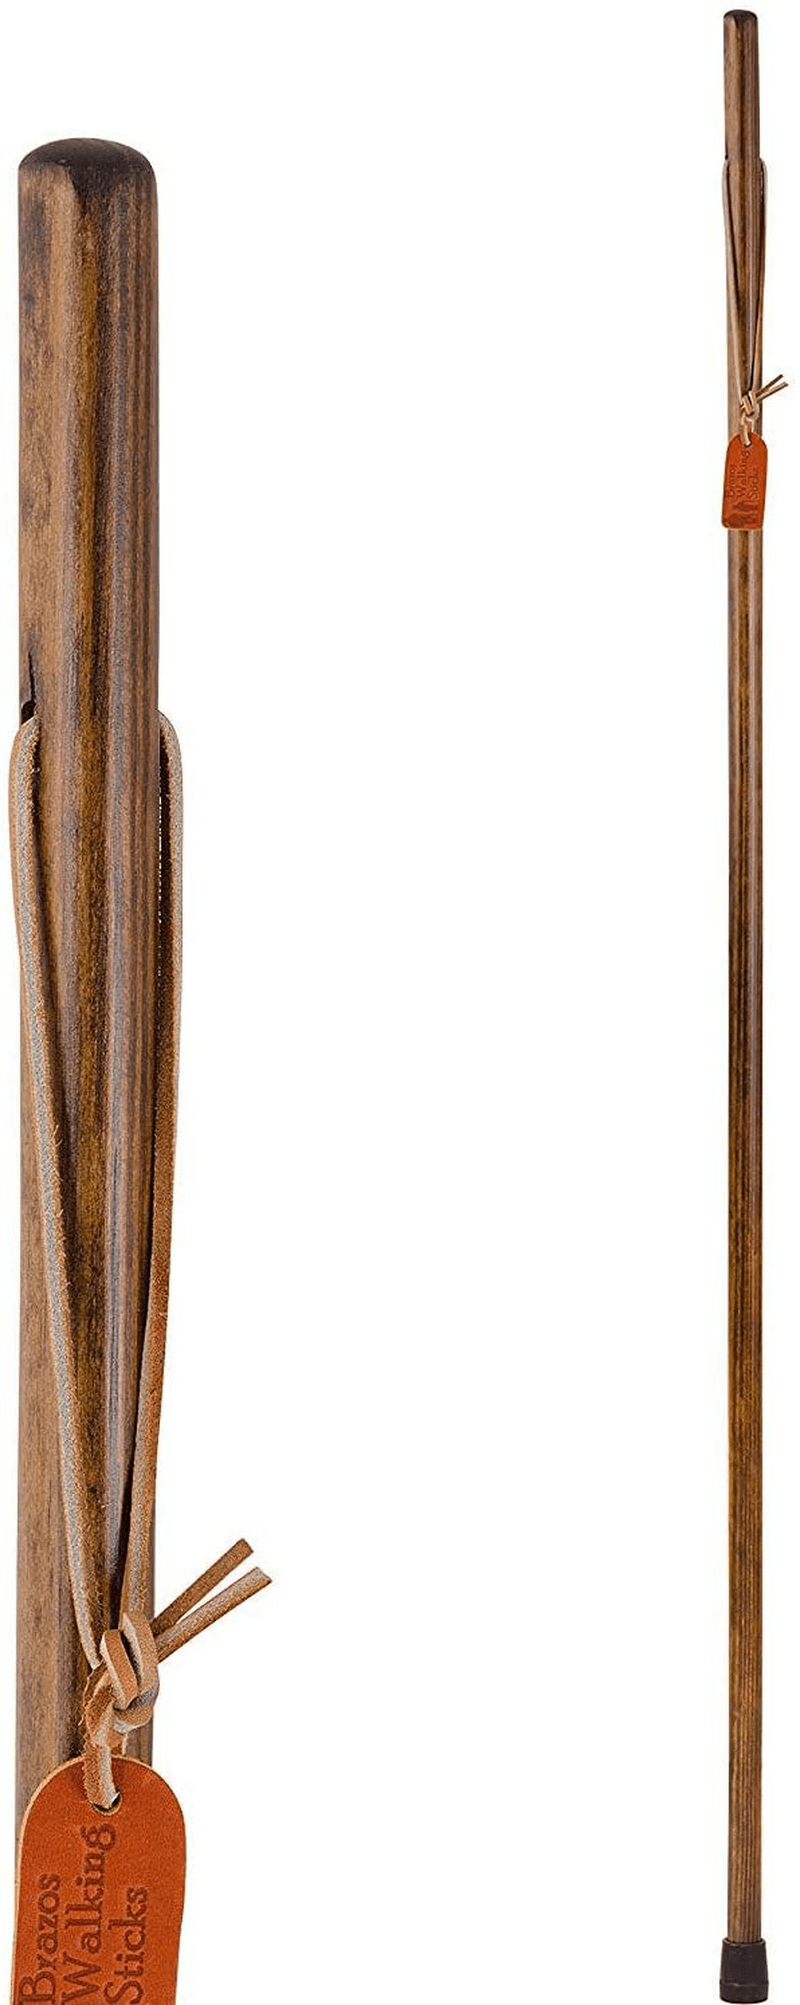 Brazos Straight Pine Wood Walking Stick, Handcrafted Wooden Staff, Hiking Stick for Men and Women, Trekking Pole, Wooden Walking Stick, Made in the USA, 48 Inches Sporting Goods > Outdoor Recreation > Camping & Hiking > Hiking Poles Brazos   